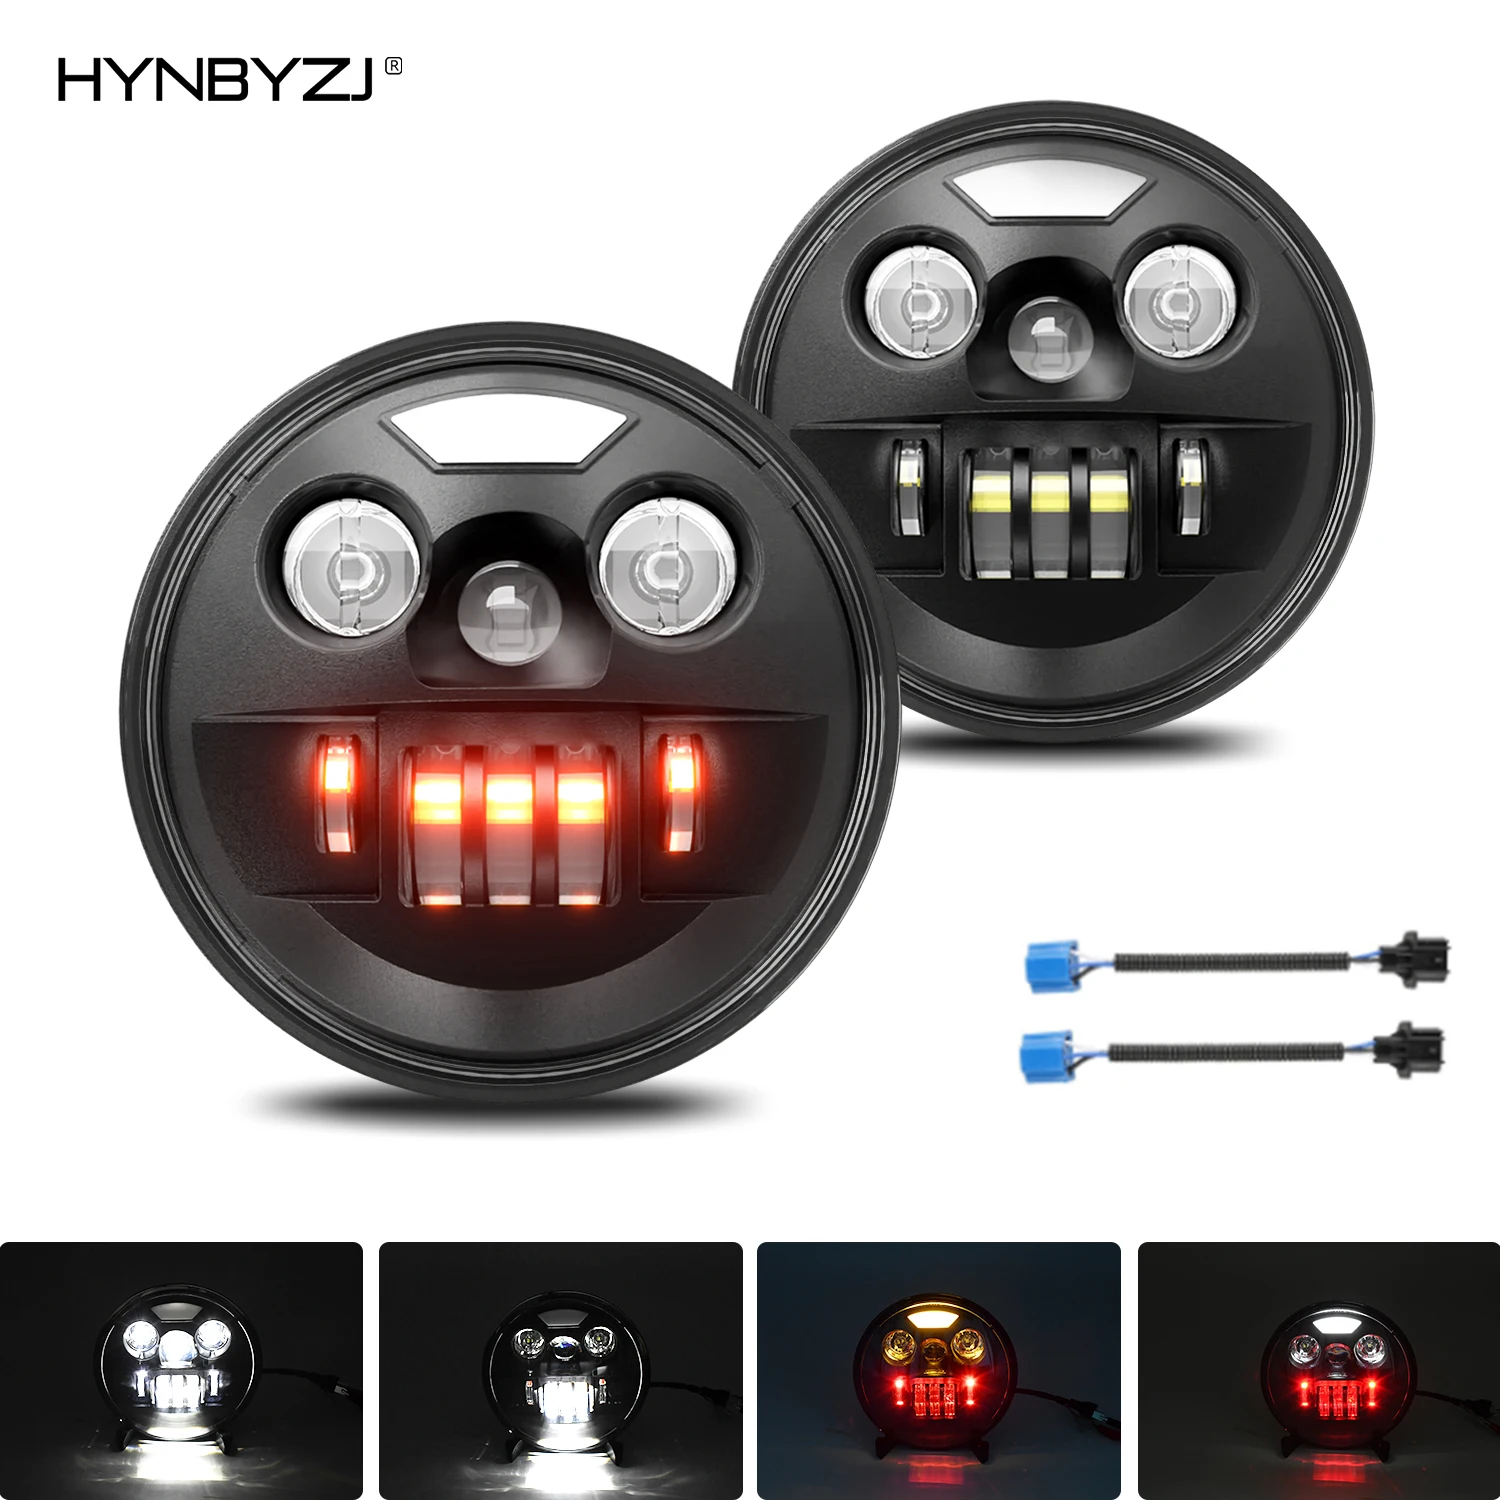 

HYNBYZJ 7 Inch 200W Round LED Headlamp Automatic Turning Changes Motorcycle Headlights Fit For Harley Davidson For Jeep Wrangler